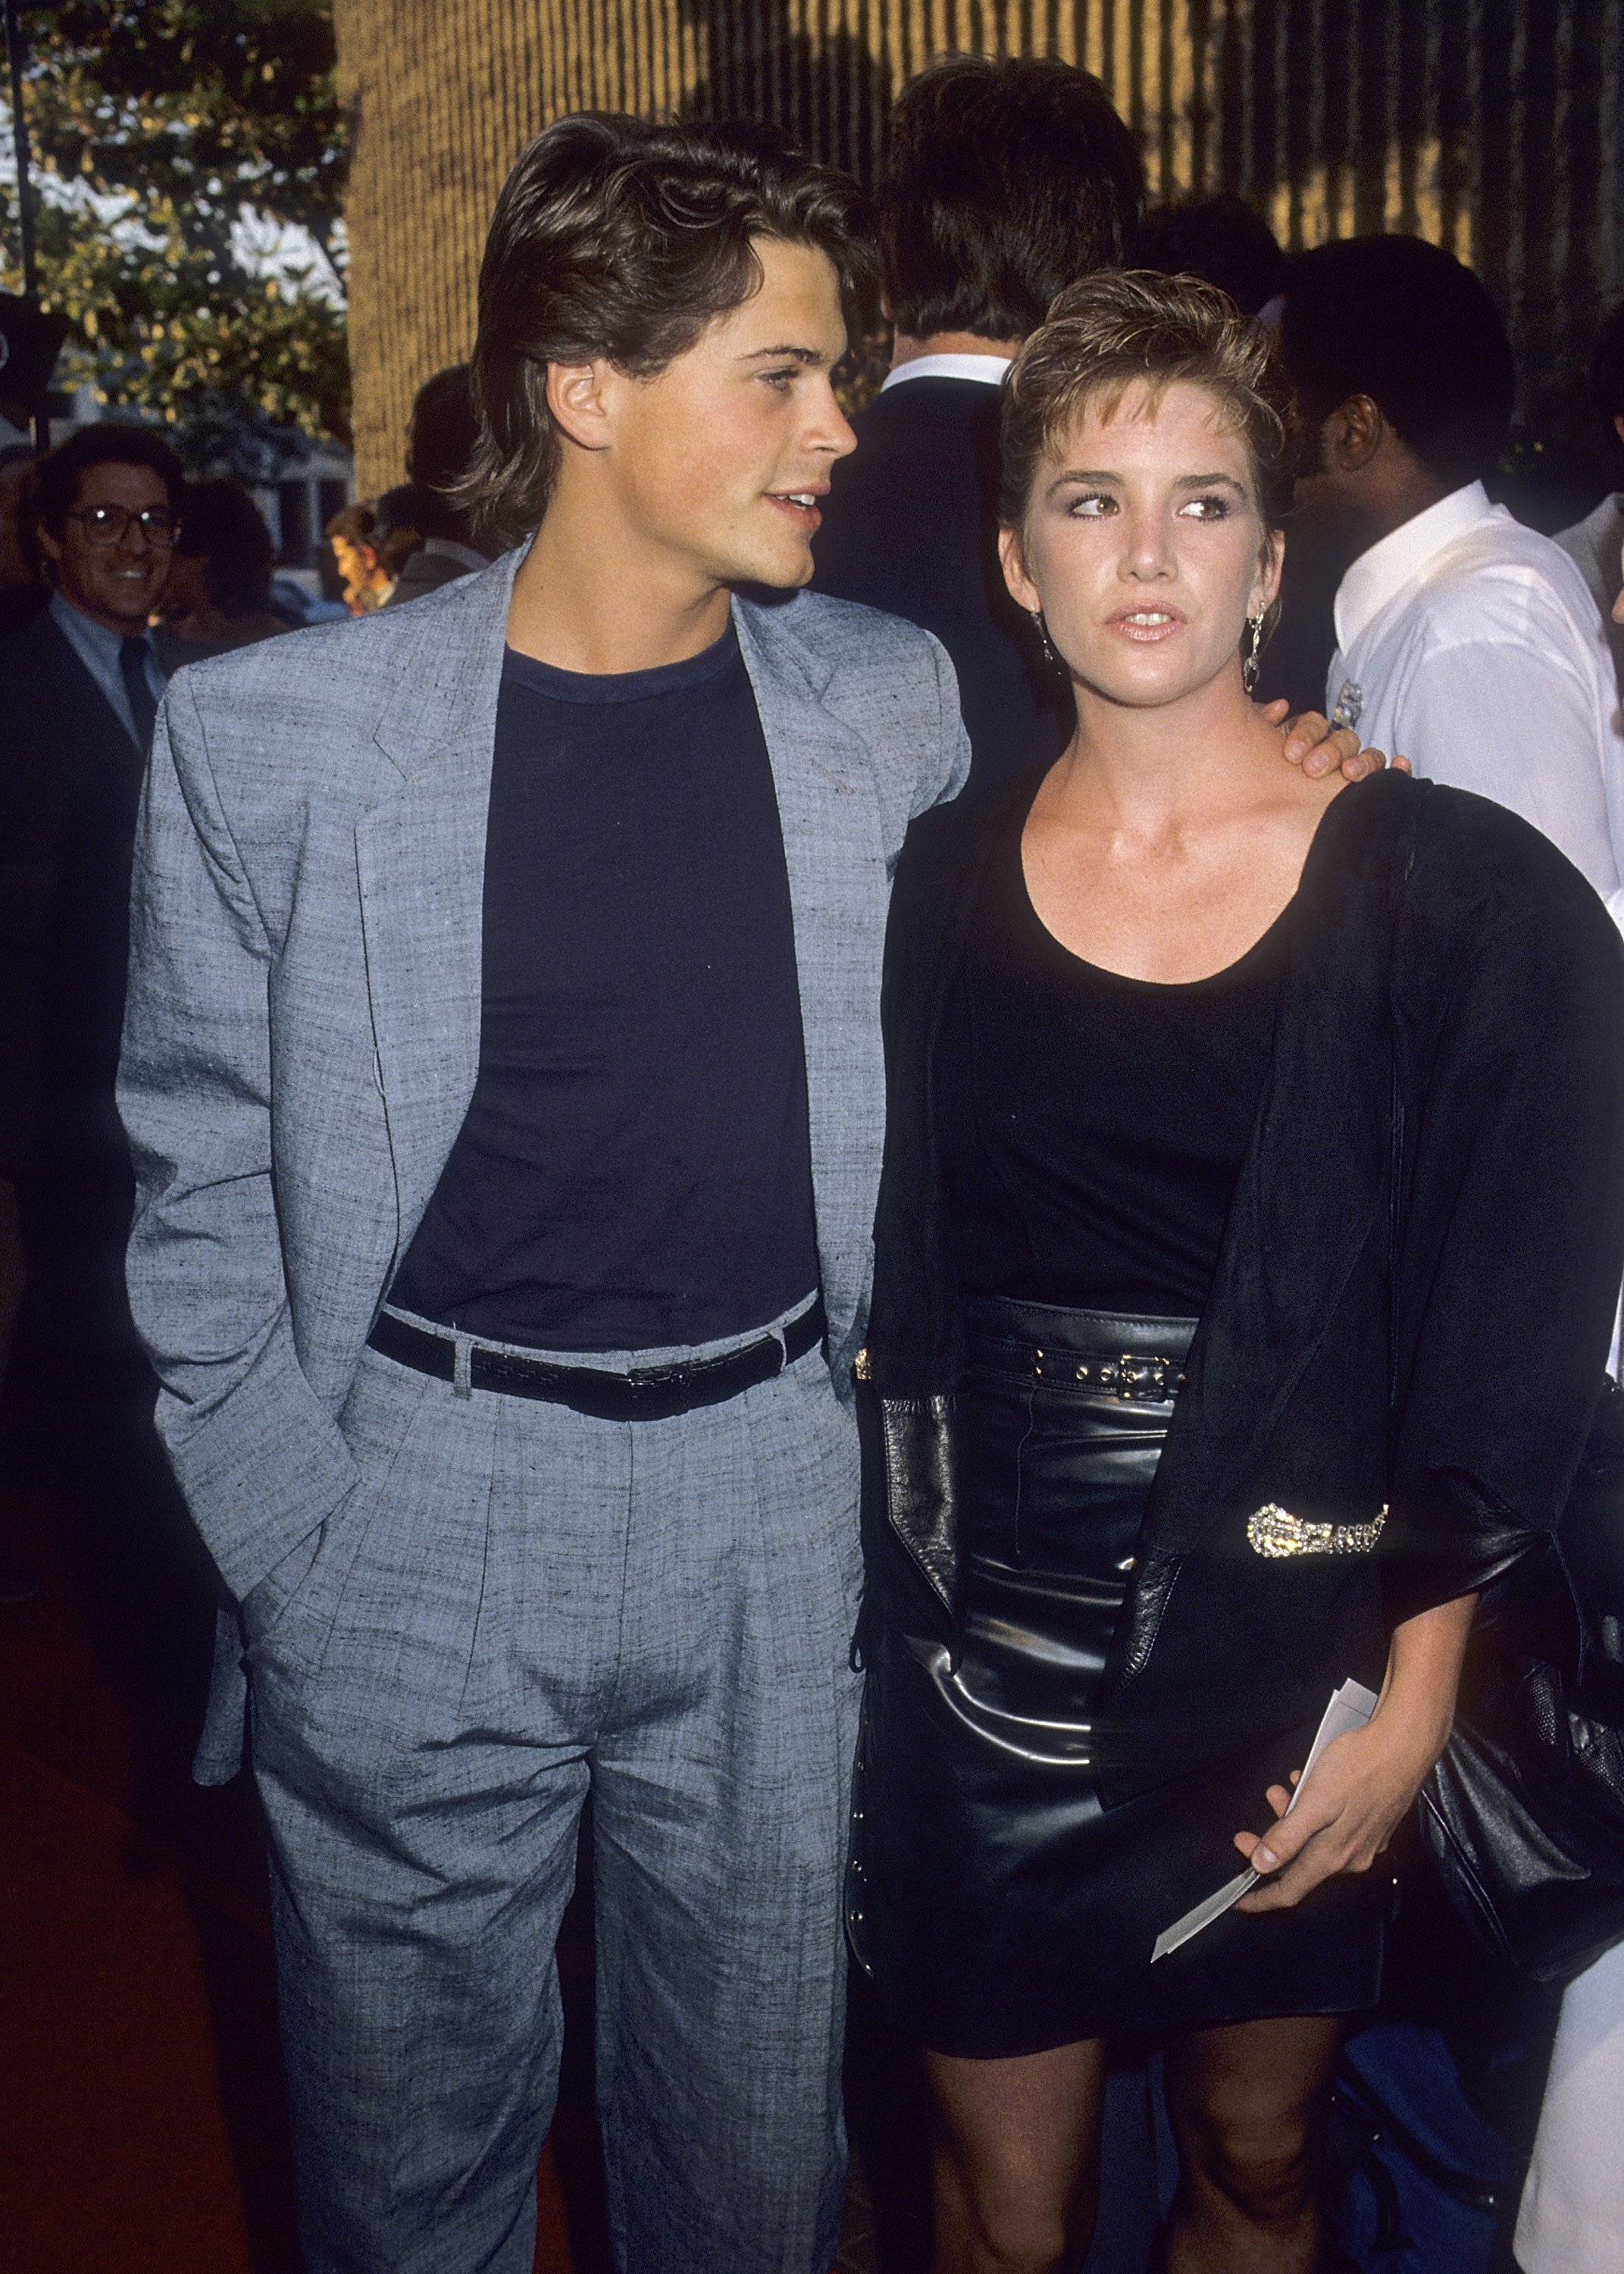 Actor Rob Lowe and actress Melissa Gilbert attend the "Ghostbusters" Westwood Premiere on June 7, 1984 at the Avco Center Cinemas in Westwood, California